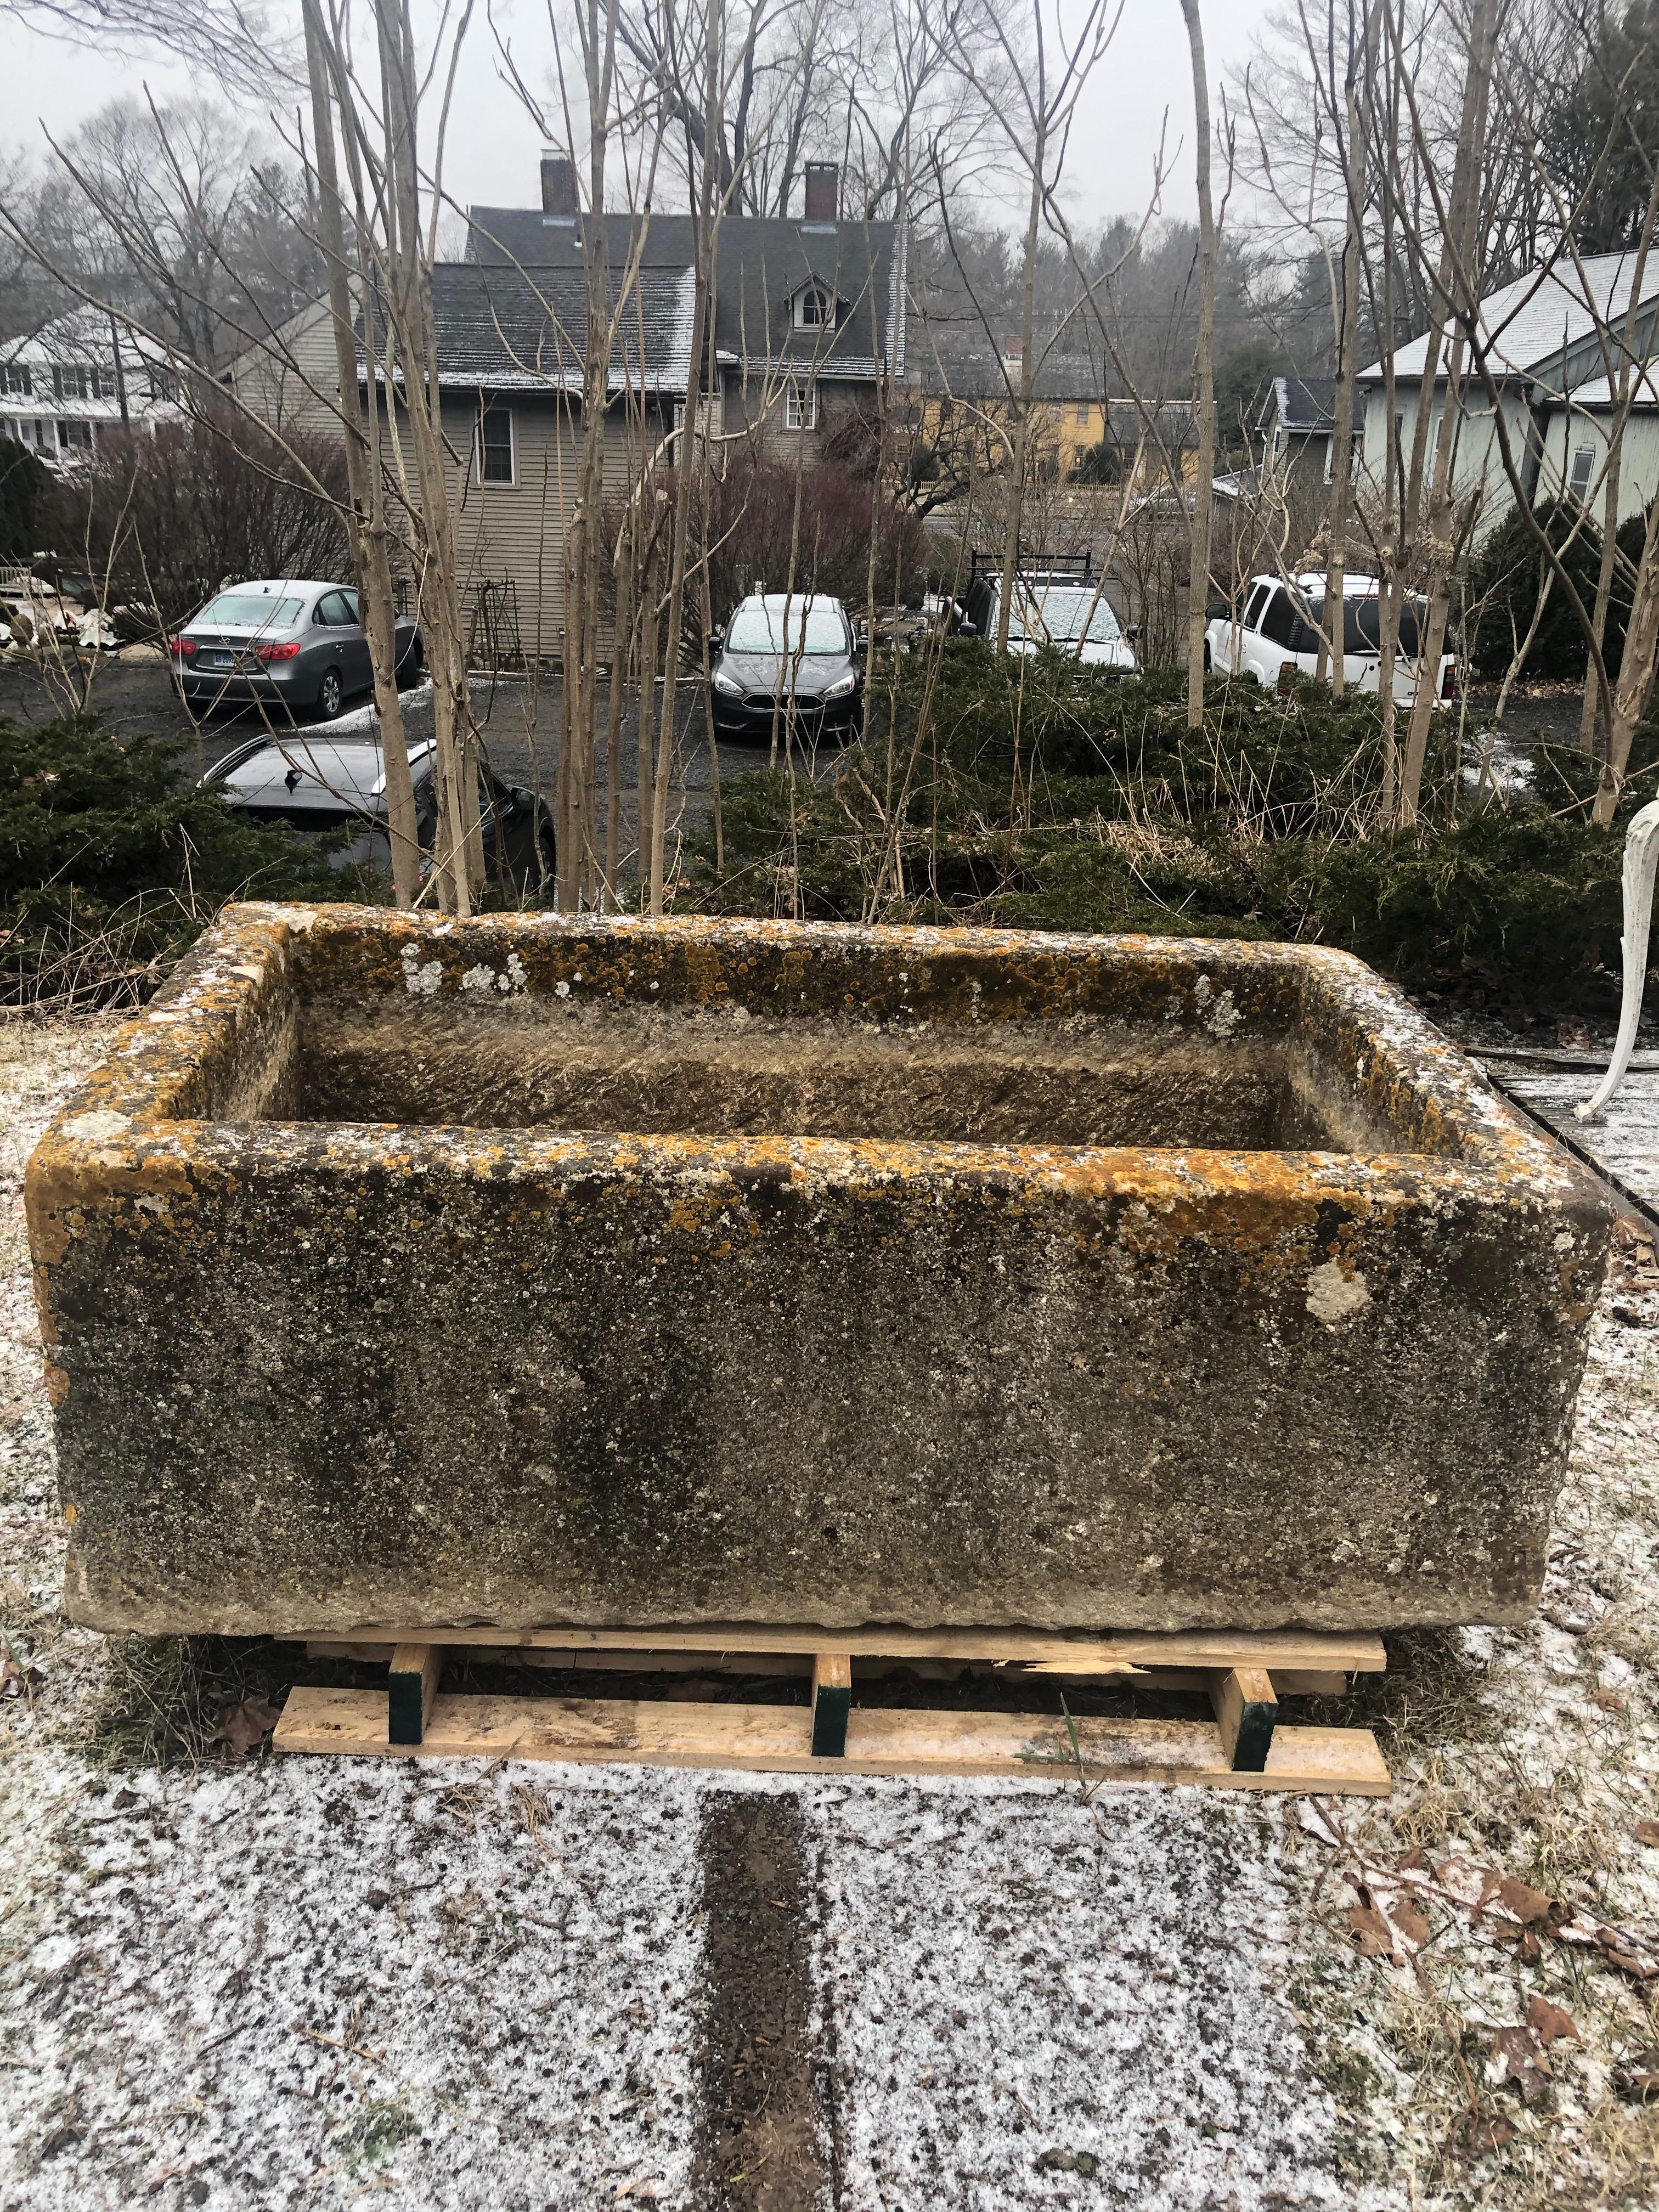 One of the finest troughs sourced on our most recent buying trip to France, this stunning hand carved limestone trough is in excellent antique condition and features a fabulous patina with heavy lichen in white, yellow and orange. It has no cracks